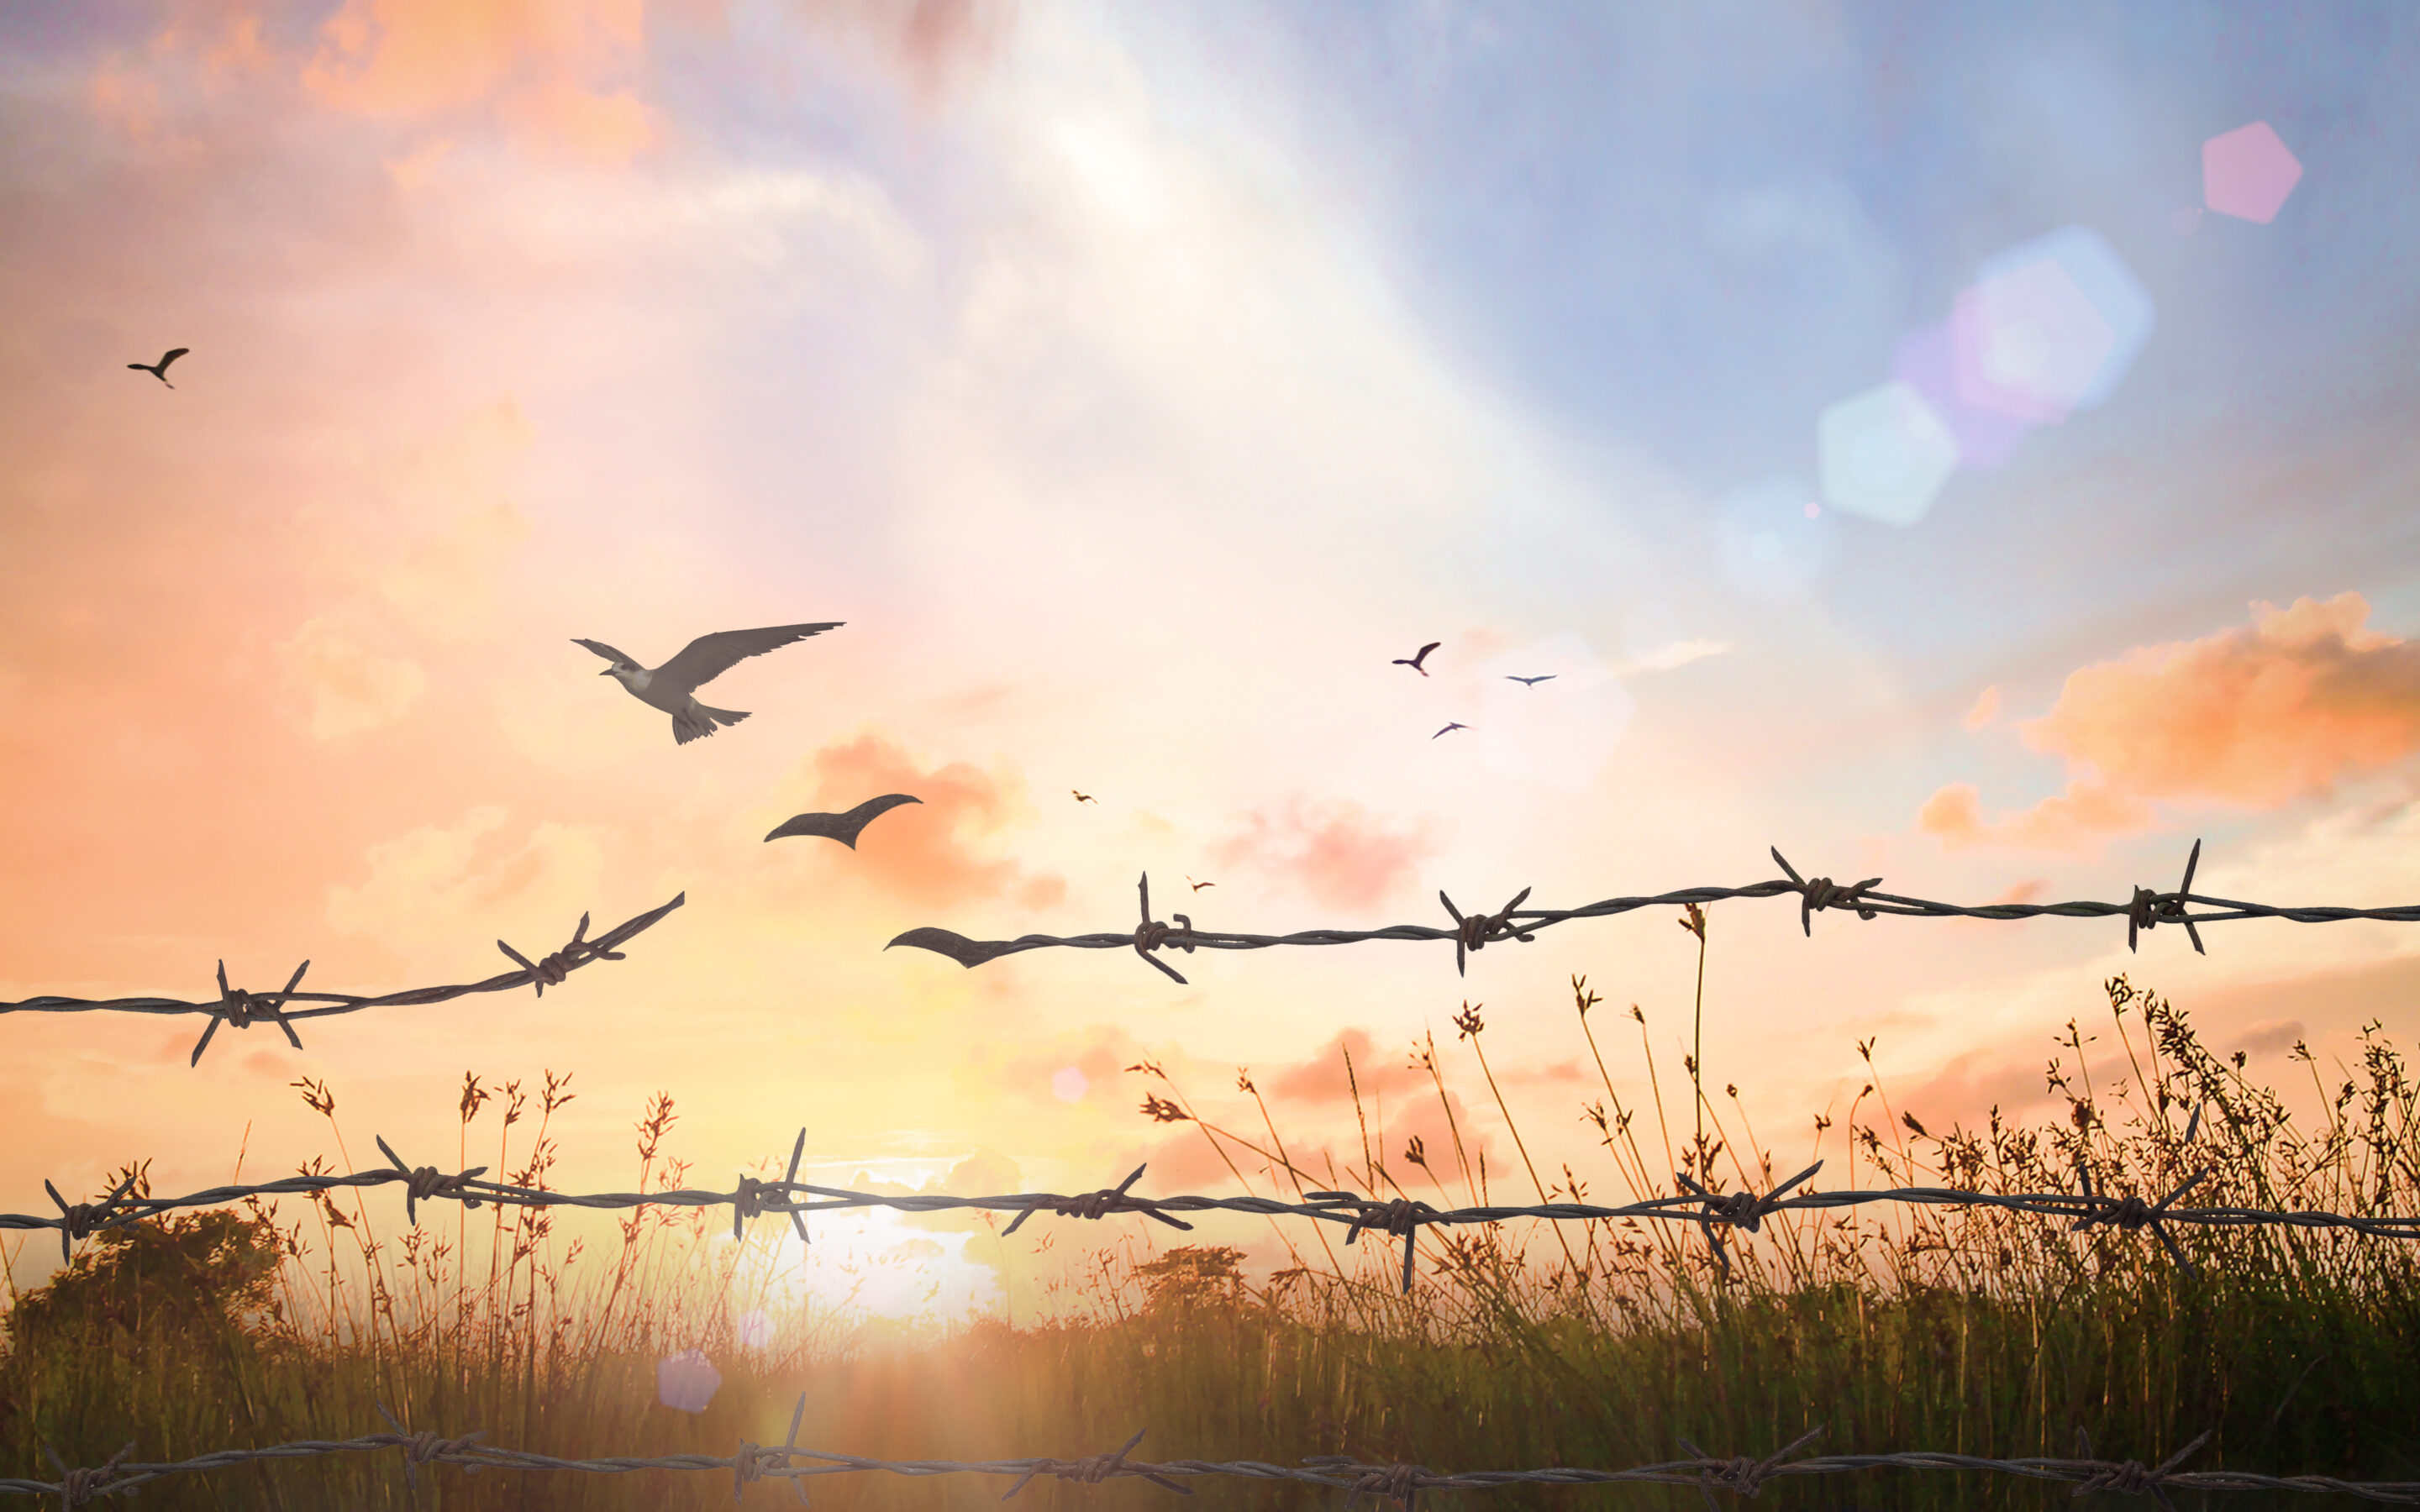 Birds flying through break in fence depicting freedom from forgiving self